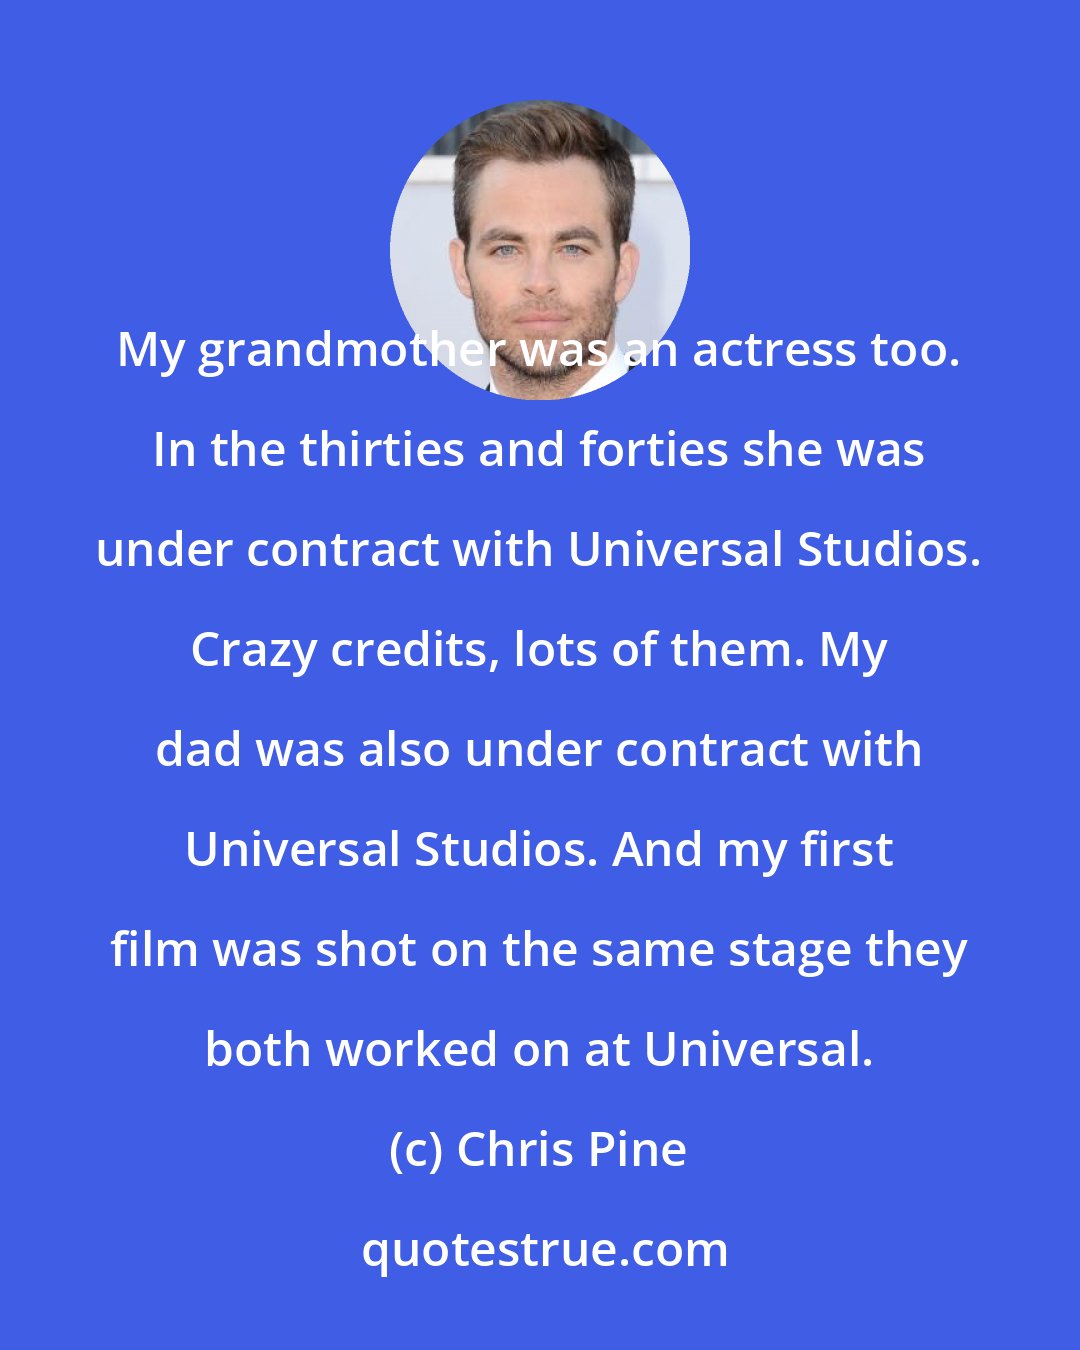 Chris Pine: My grandmother was an actress too. In the thirties and forties she was under contract with Universal Studios. Crazy credits, lots of them. My dad was also under contract with Universal Studios. And my first film was shot on the same stage they both worked on at Universal.